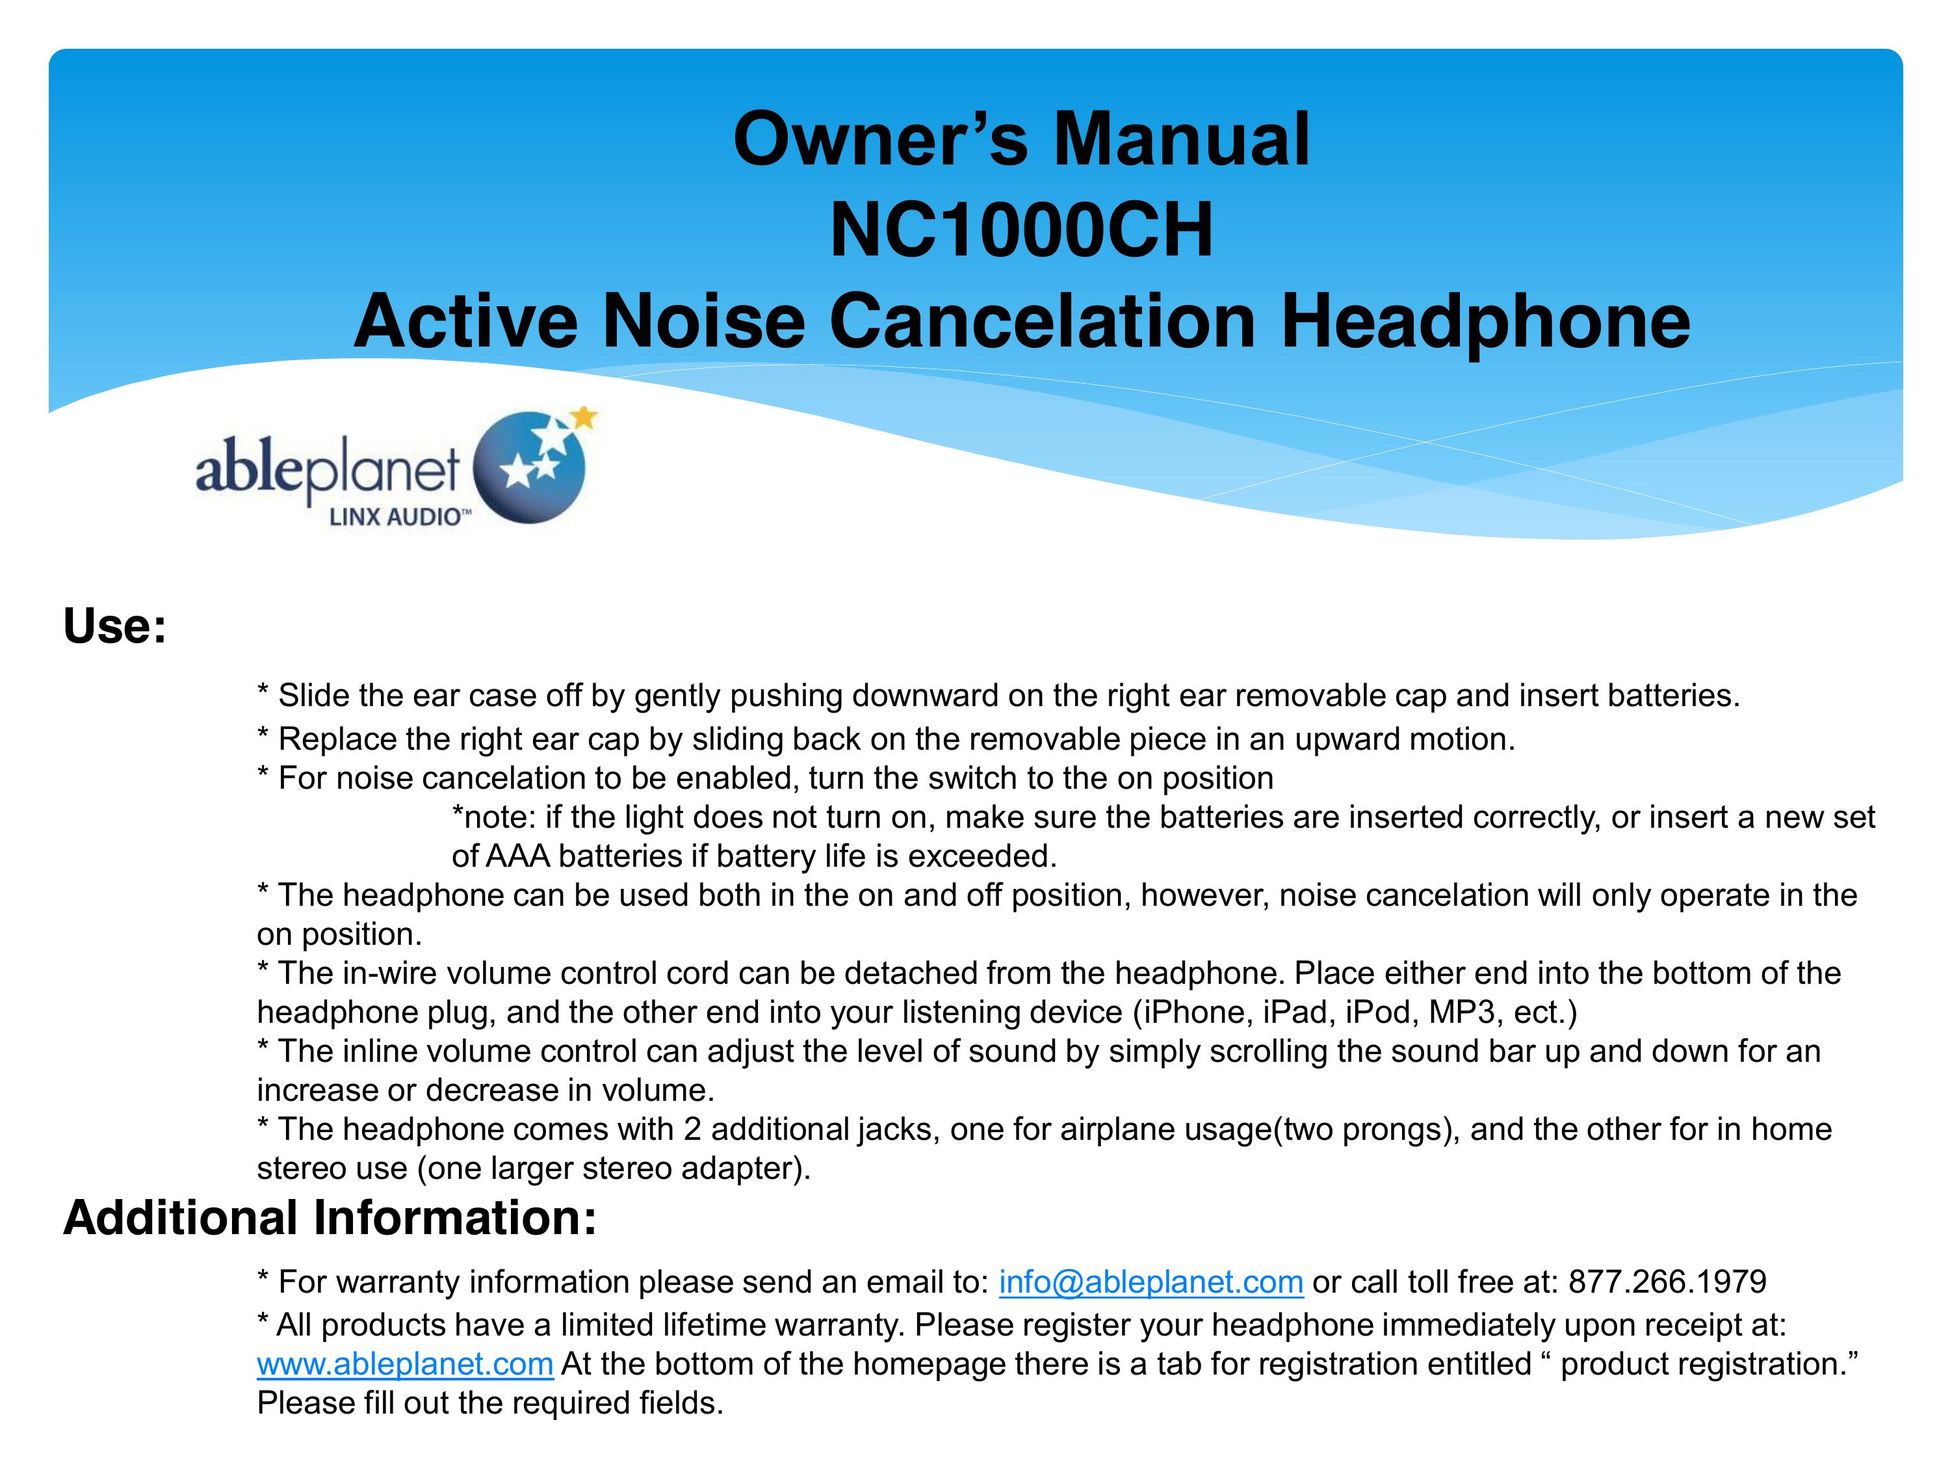 Able Planet NC1000CH Headphones User Manual